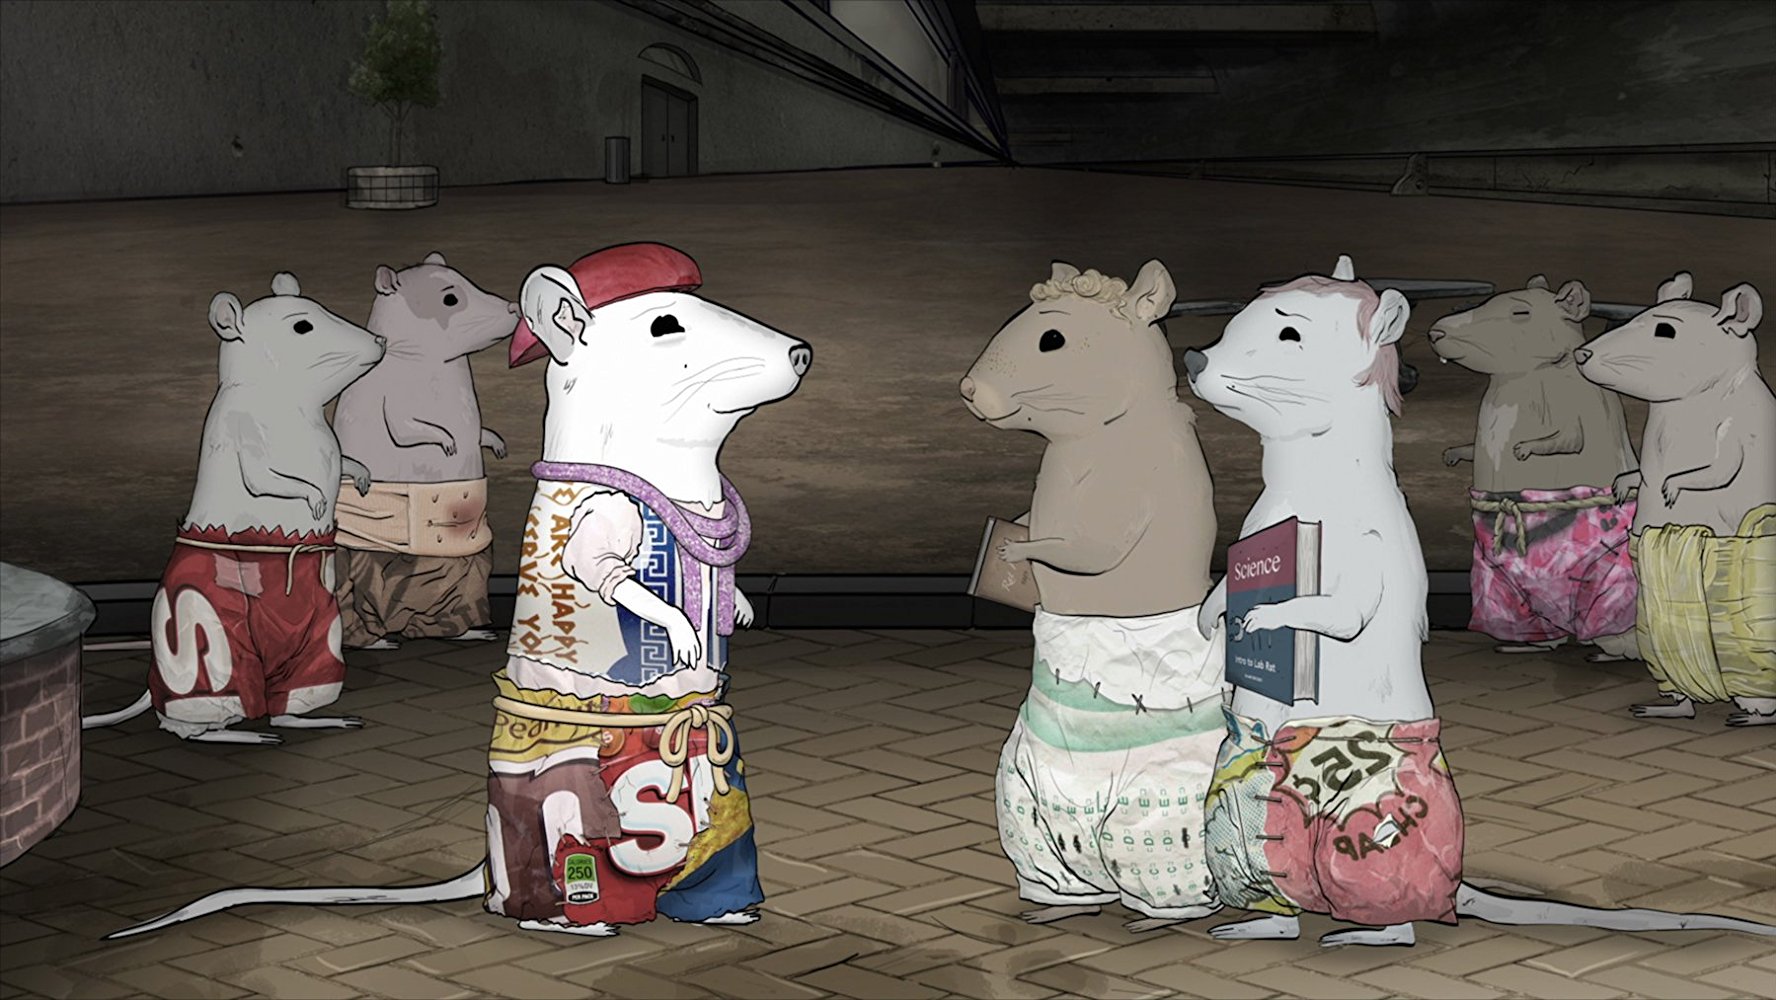 Animals: Season Three of Animated Series Coming to HBO This Summer